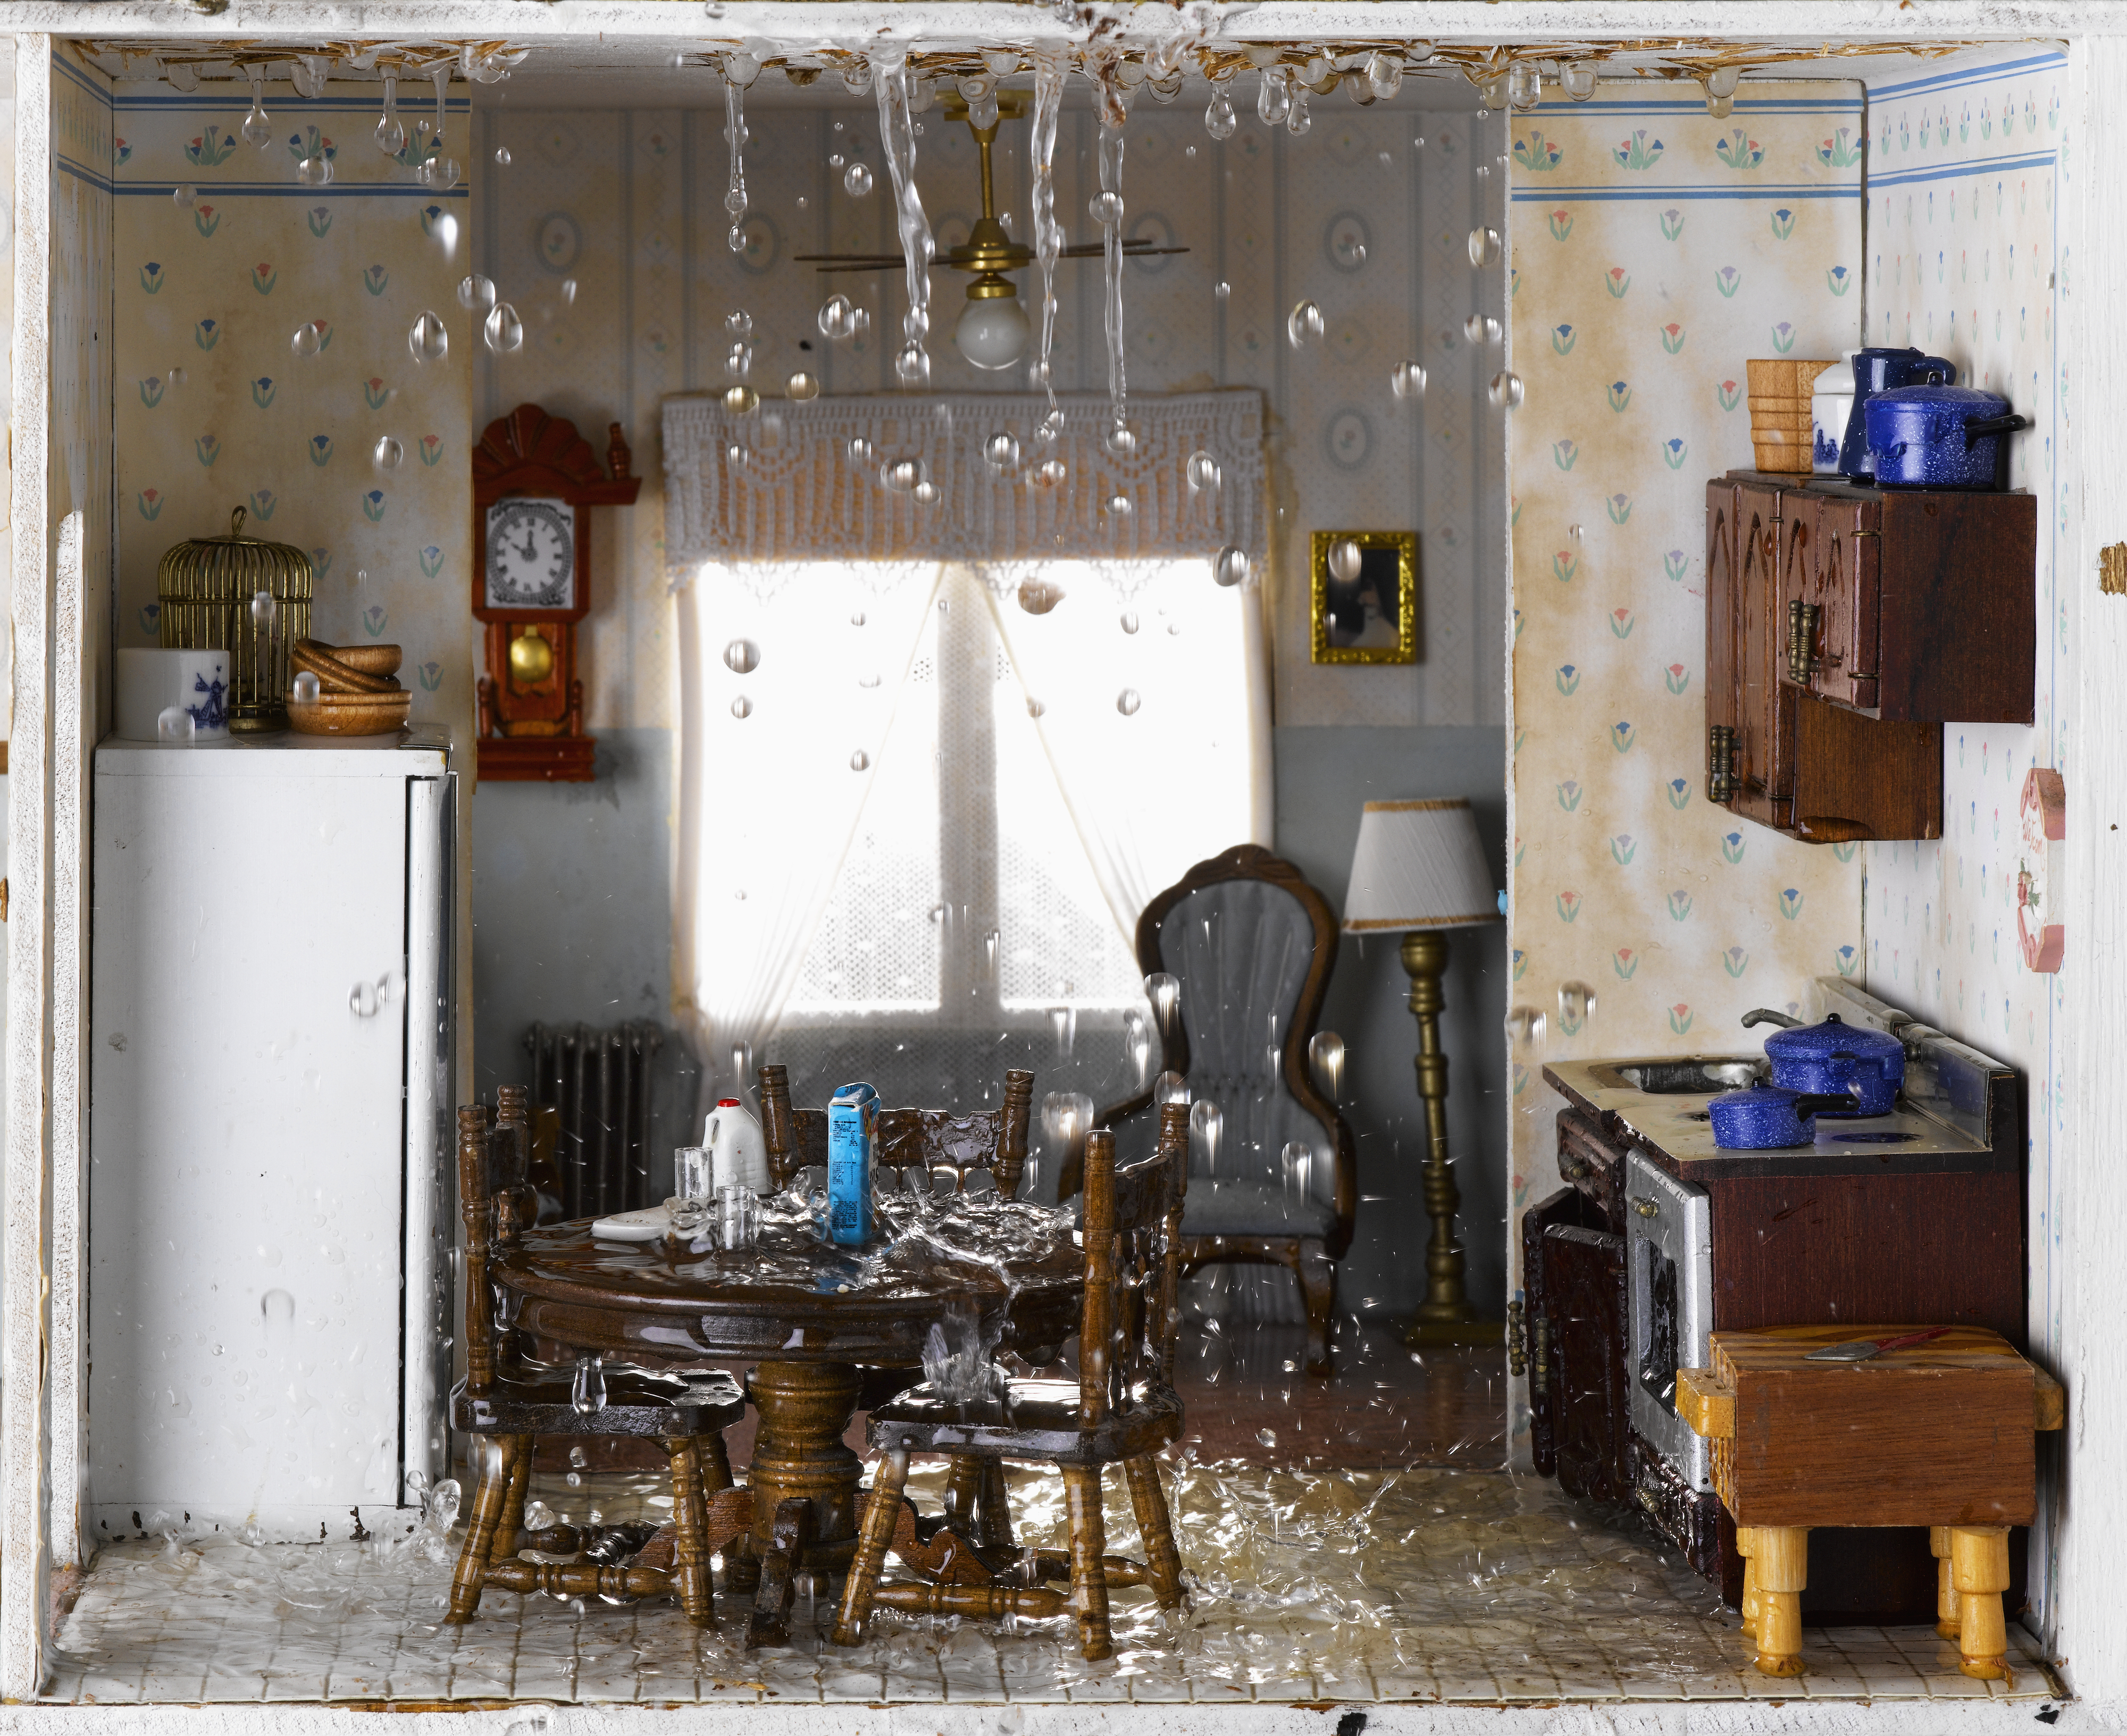 Miniature model of a flooded kitchen with floating debris, illustrating potential home damage